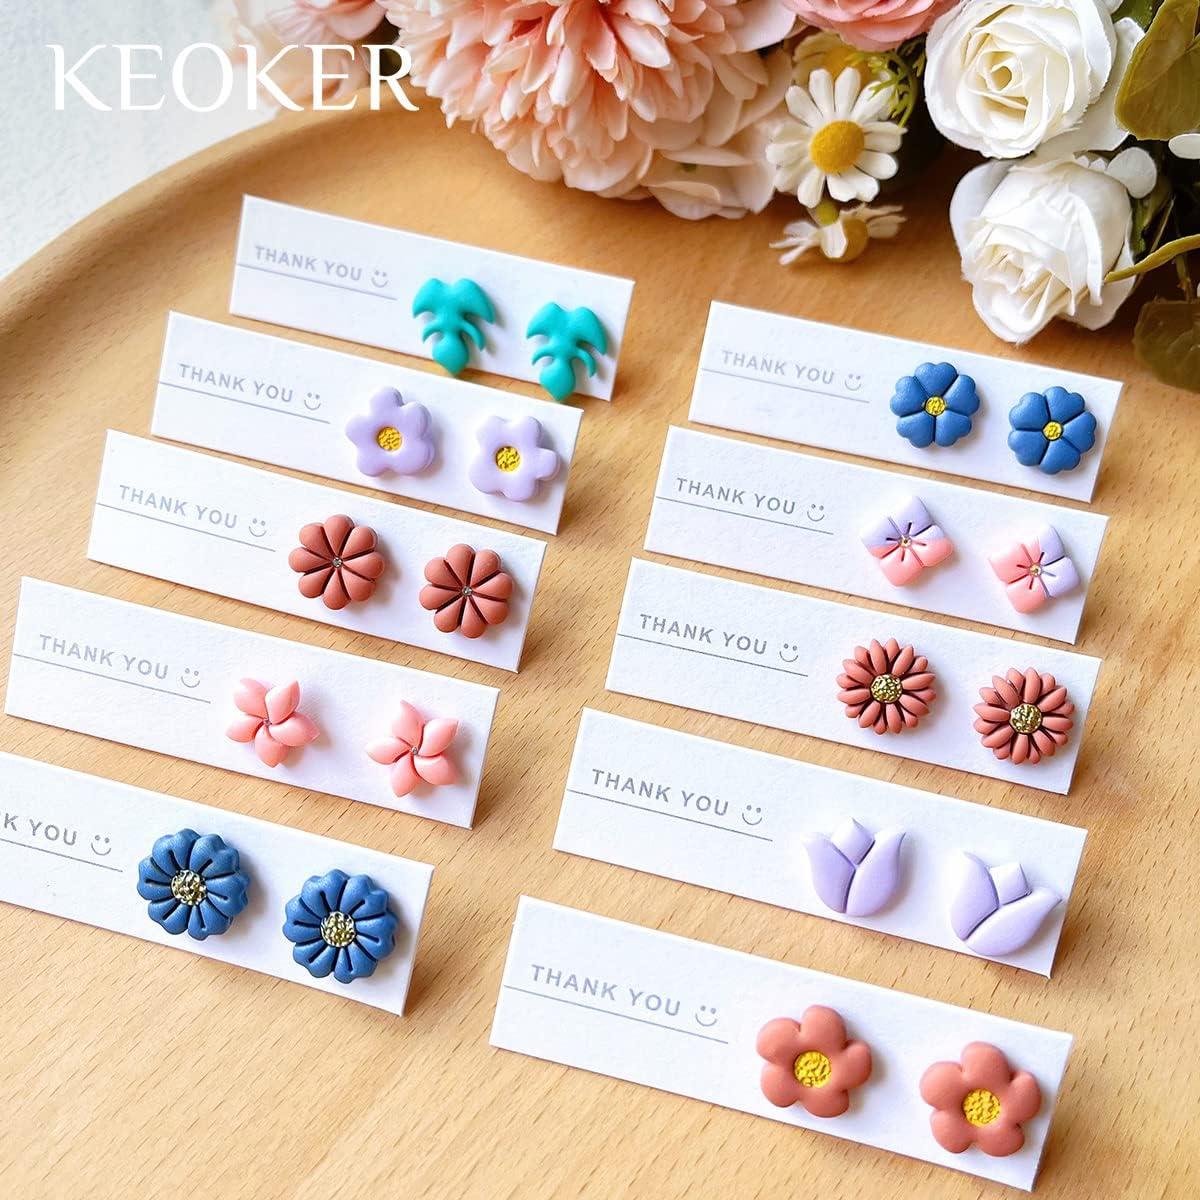  KEOKER Polymer Clay Cutters for Earrings, Spring Floral Clay  Cutters, Polymer Clay Cutters for Earrings Jewelry Making, 20 Shapes Flower  Clay Earrings Cutters (Floral Studs & Earrings Cutters)